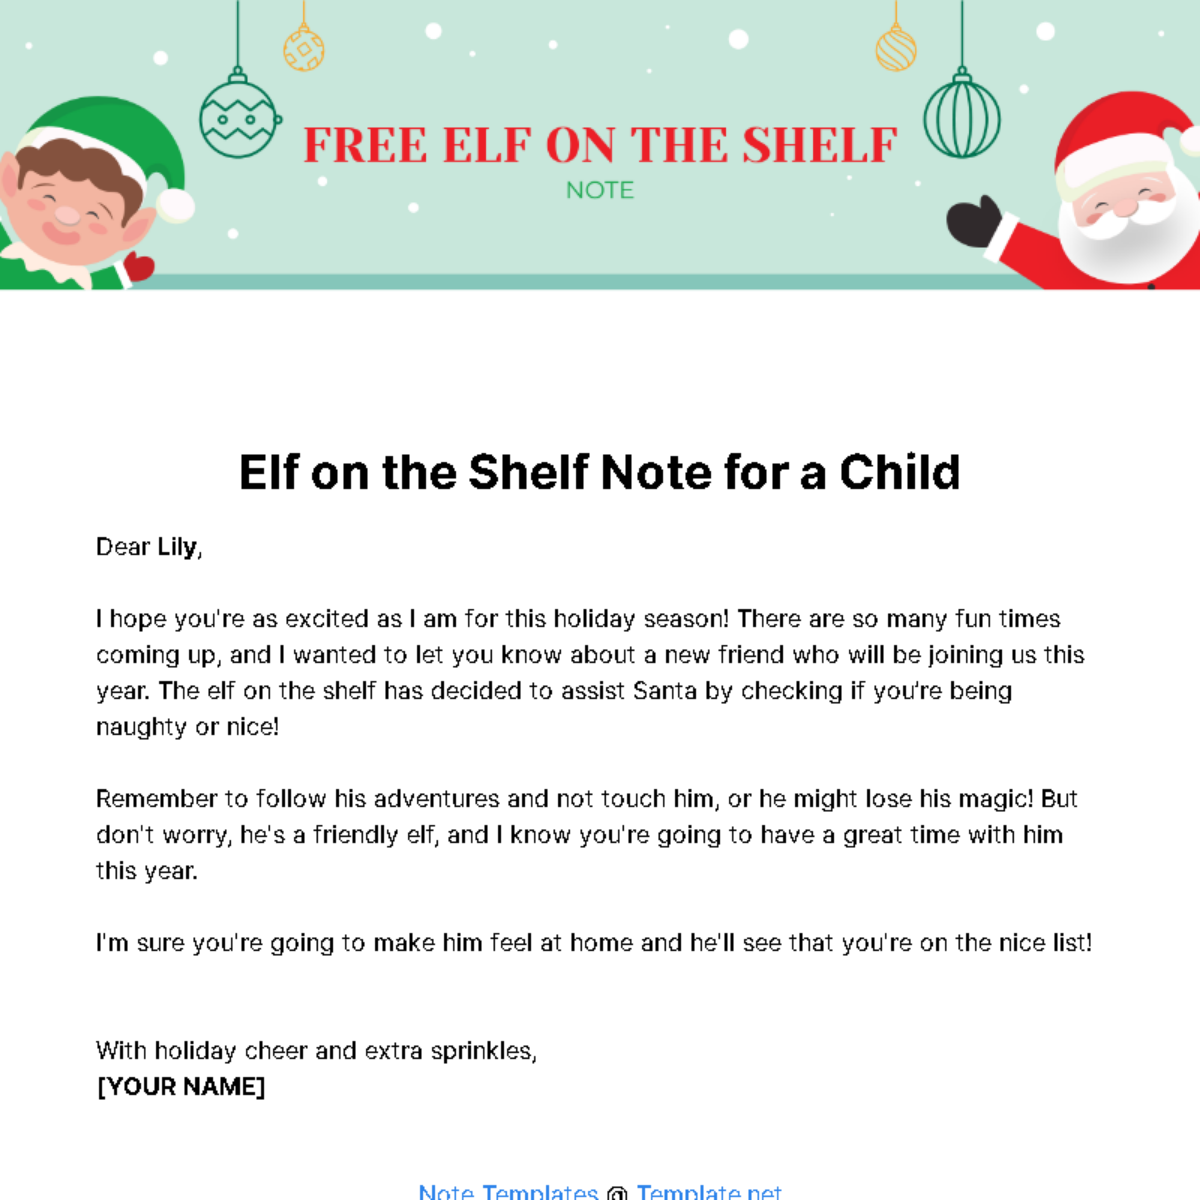 Elf on the Shelf Note Template